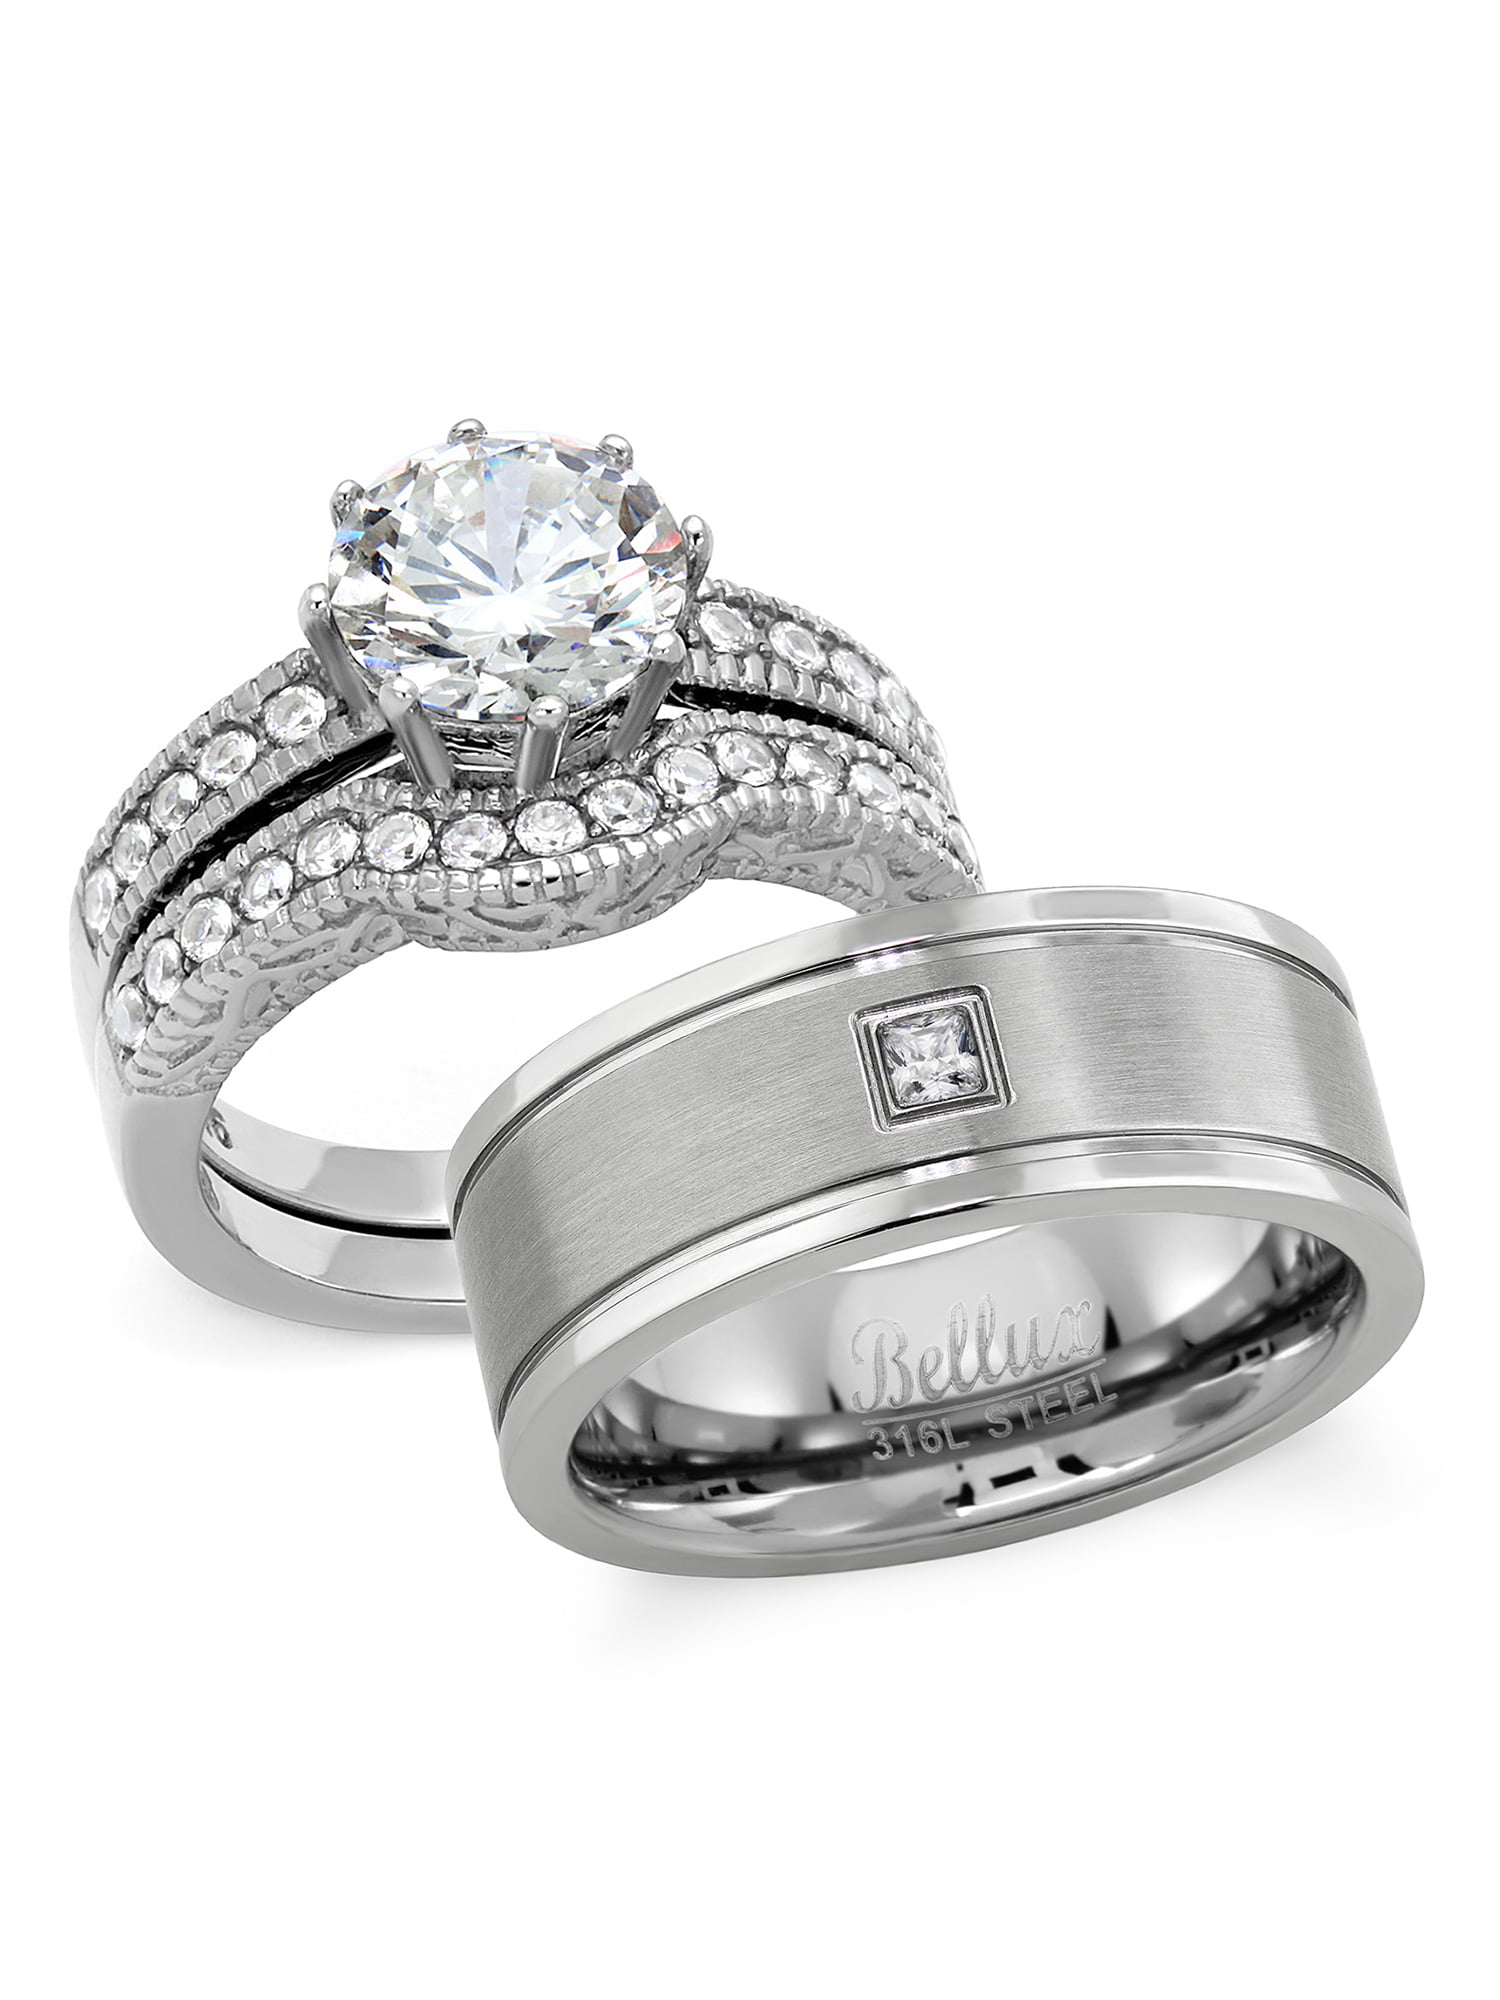 His and Hers Wedding Ring Set Stainless Steel 2.29 Carats Cubic